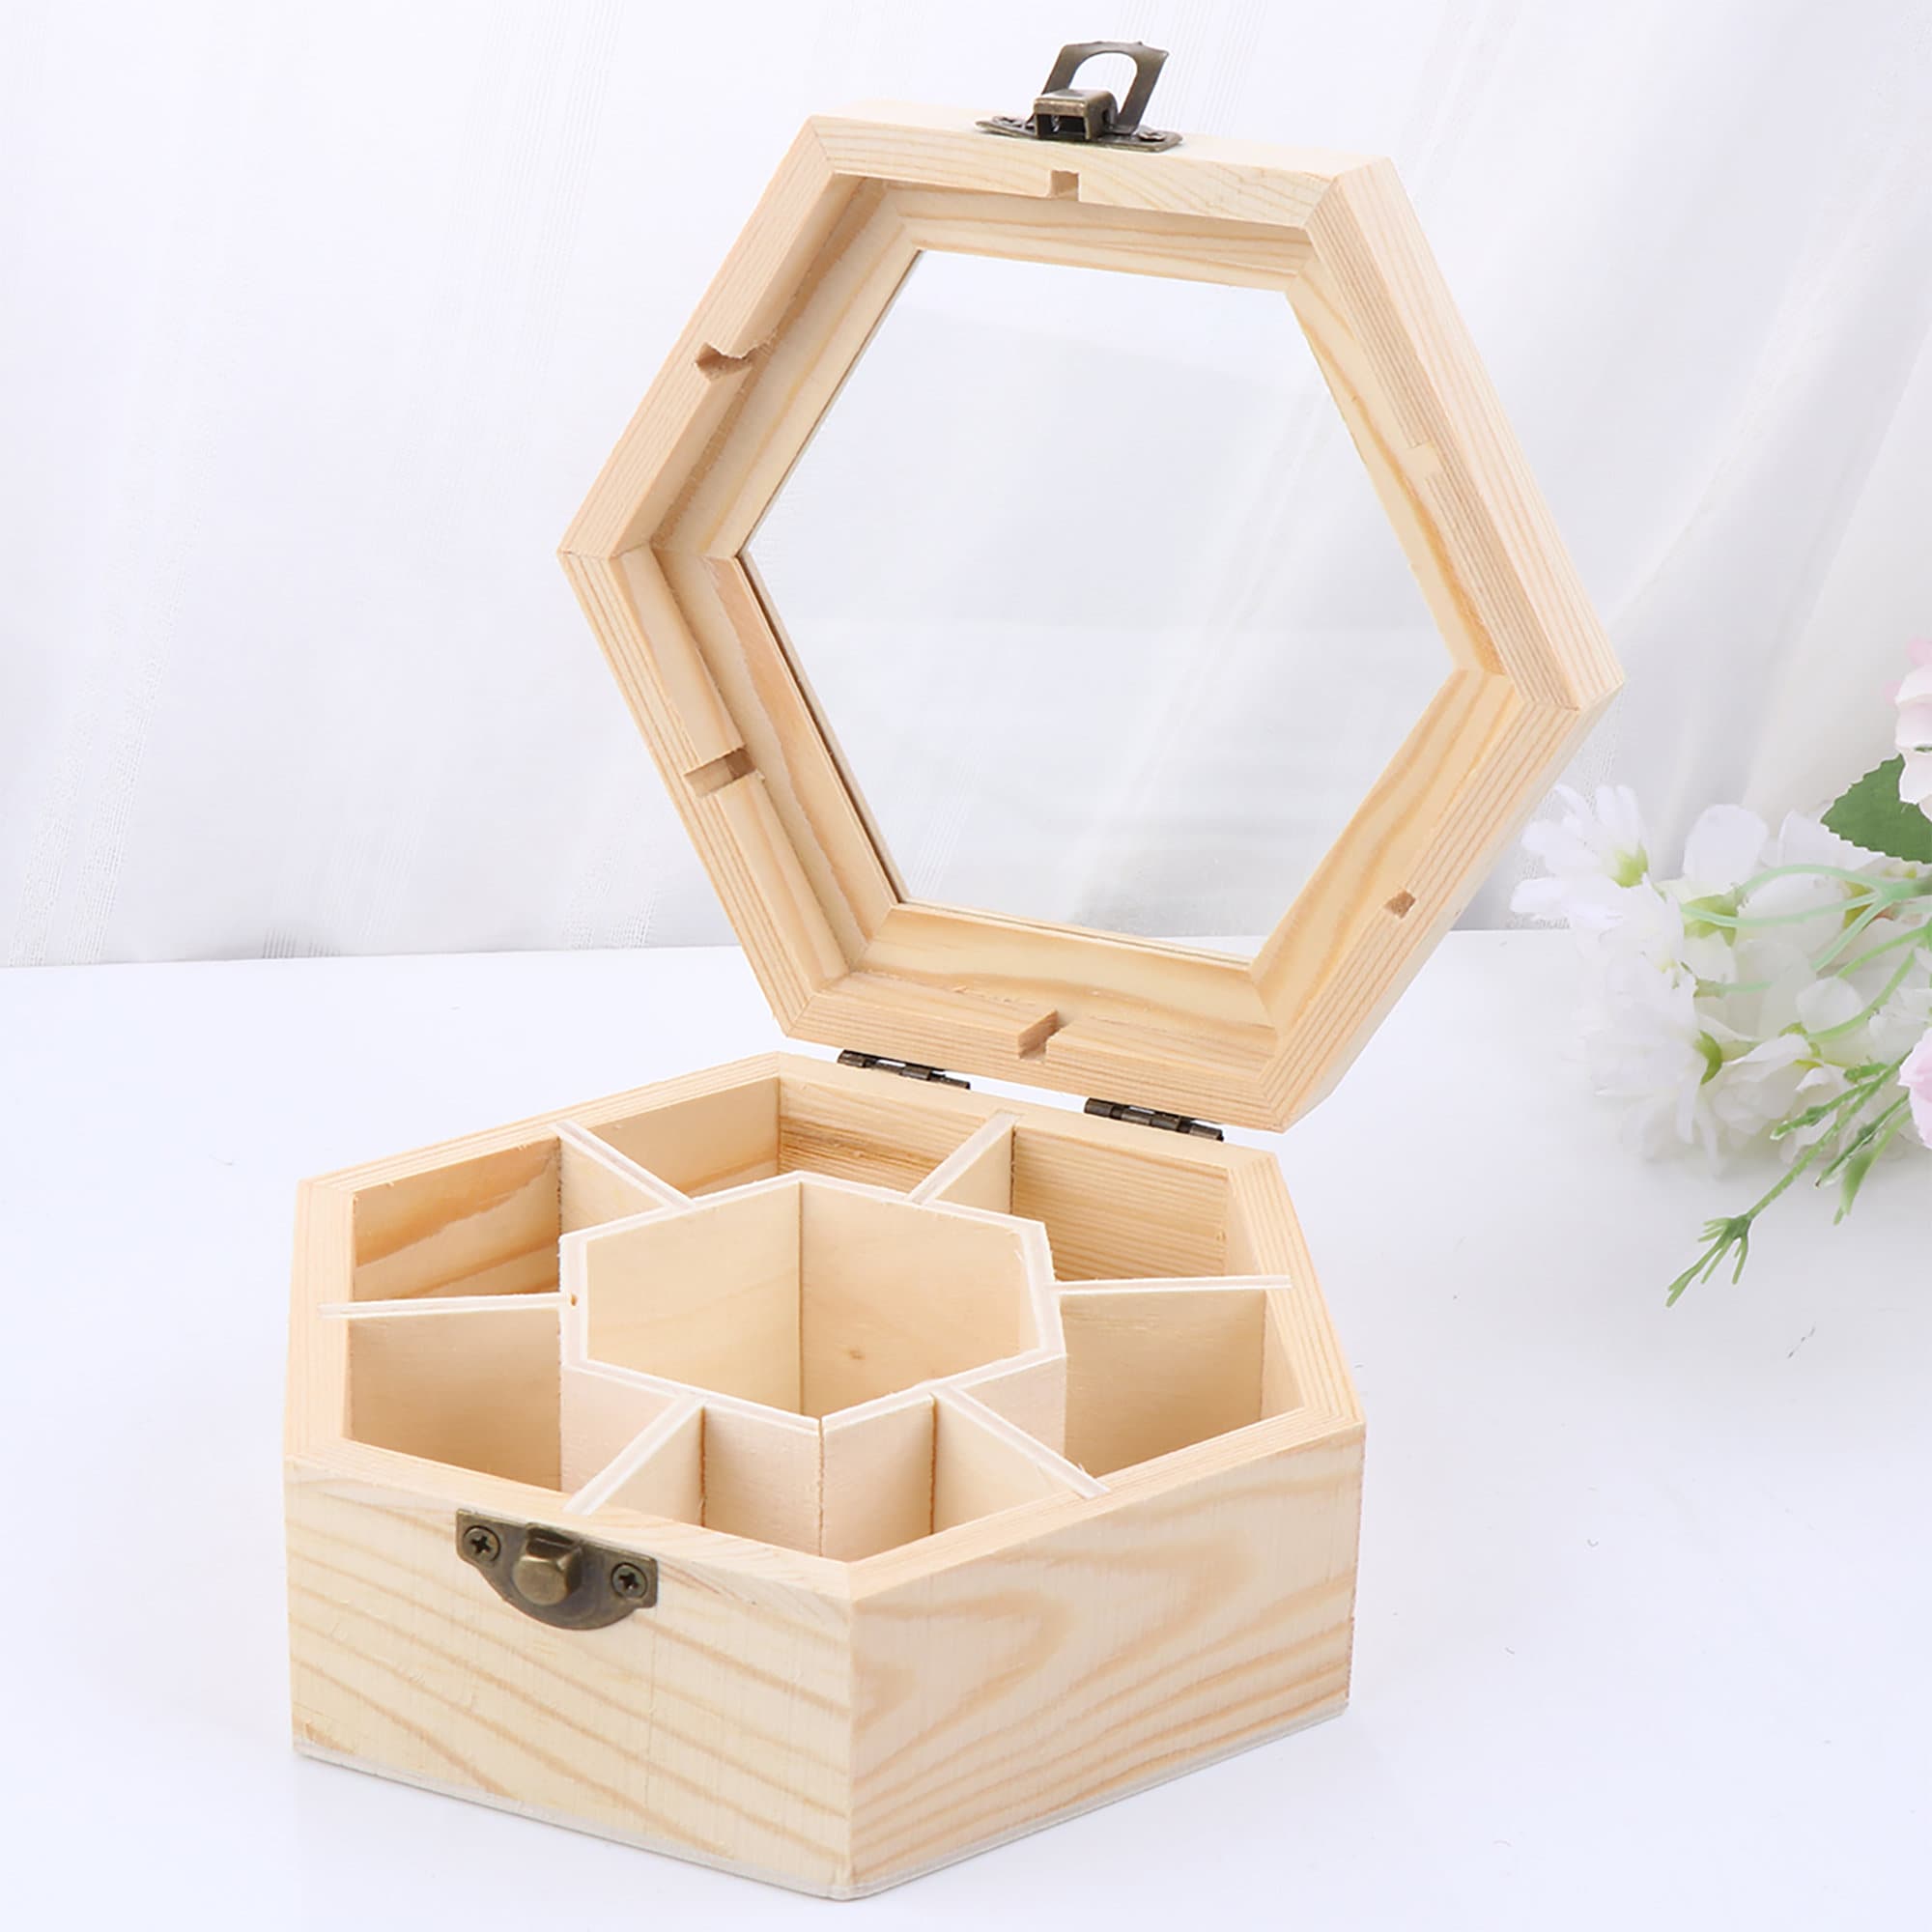 Wooden Jewelry Storage Box Hexagon Shaped Collection Box Gift Wooden Box -   Israel